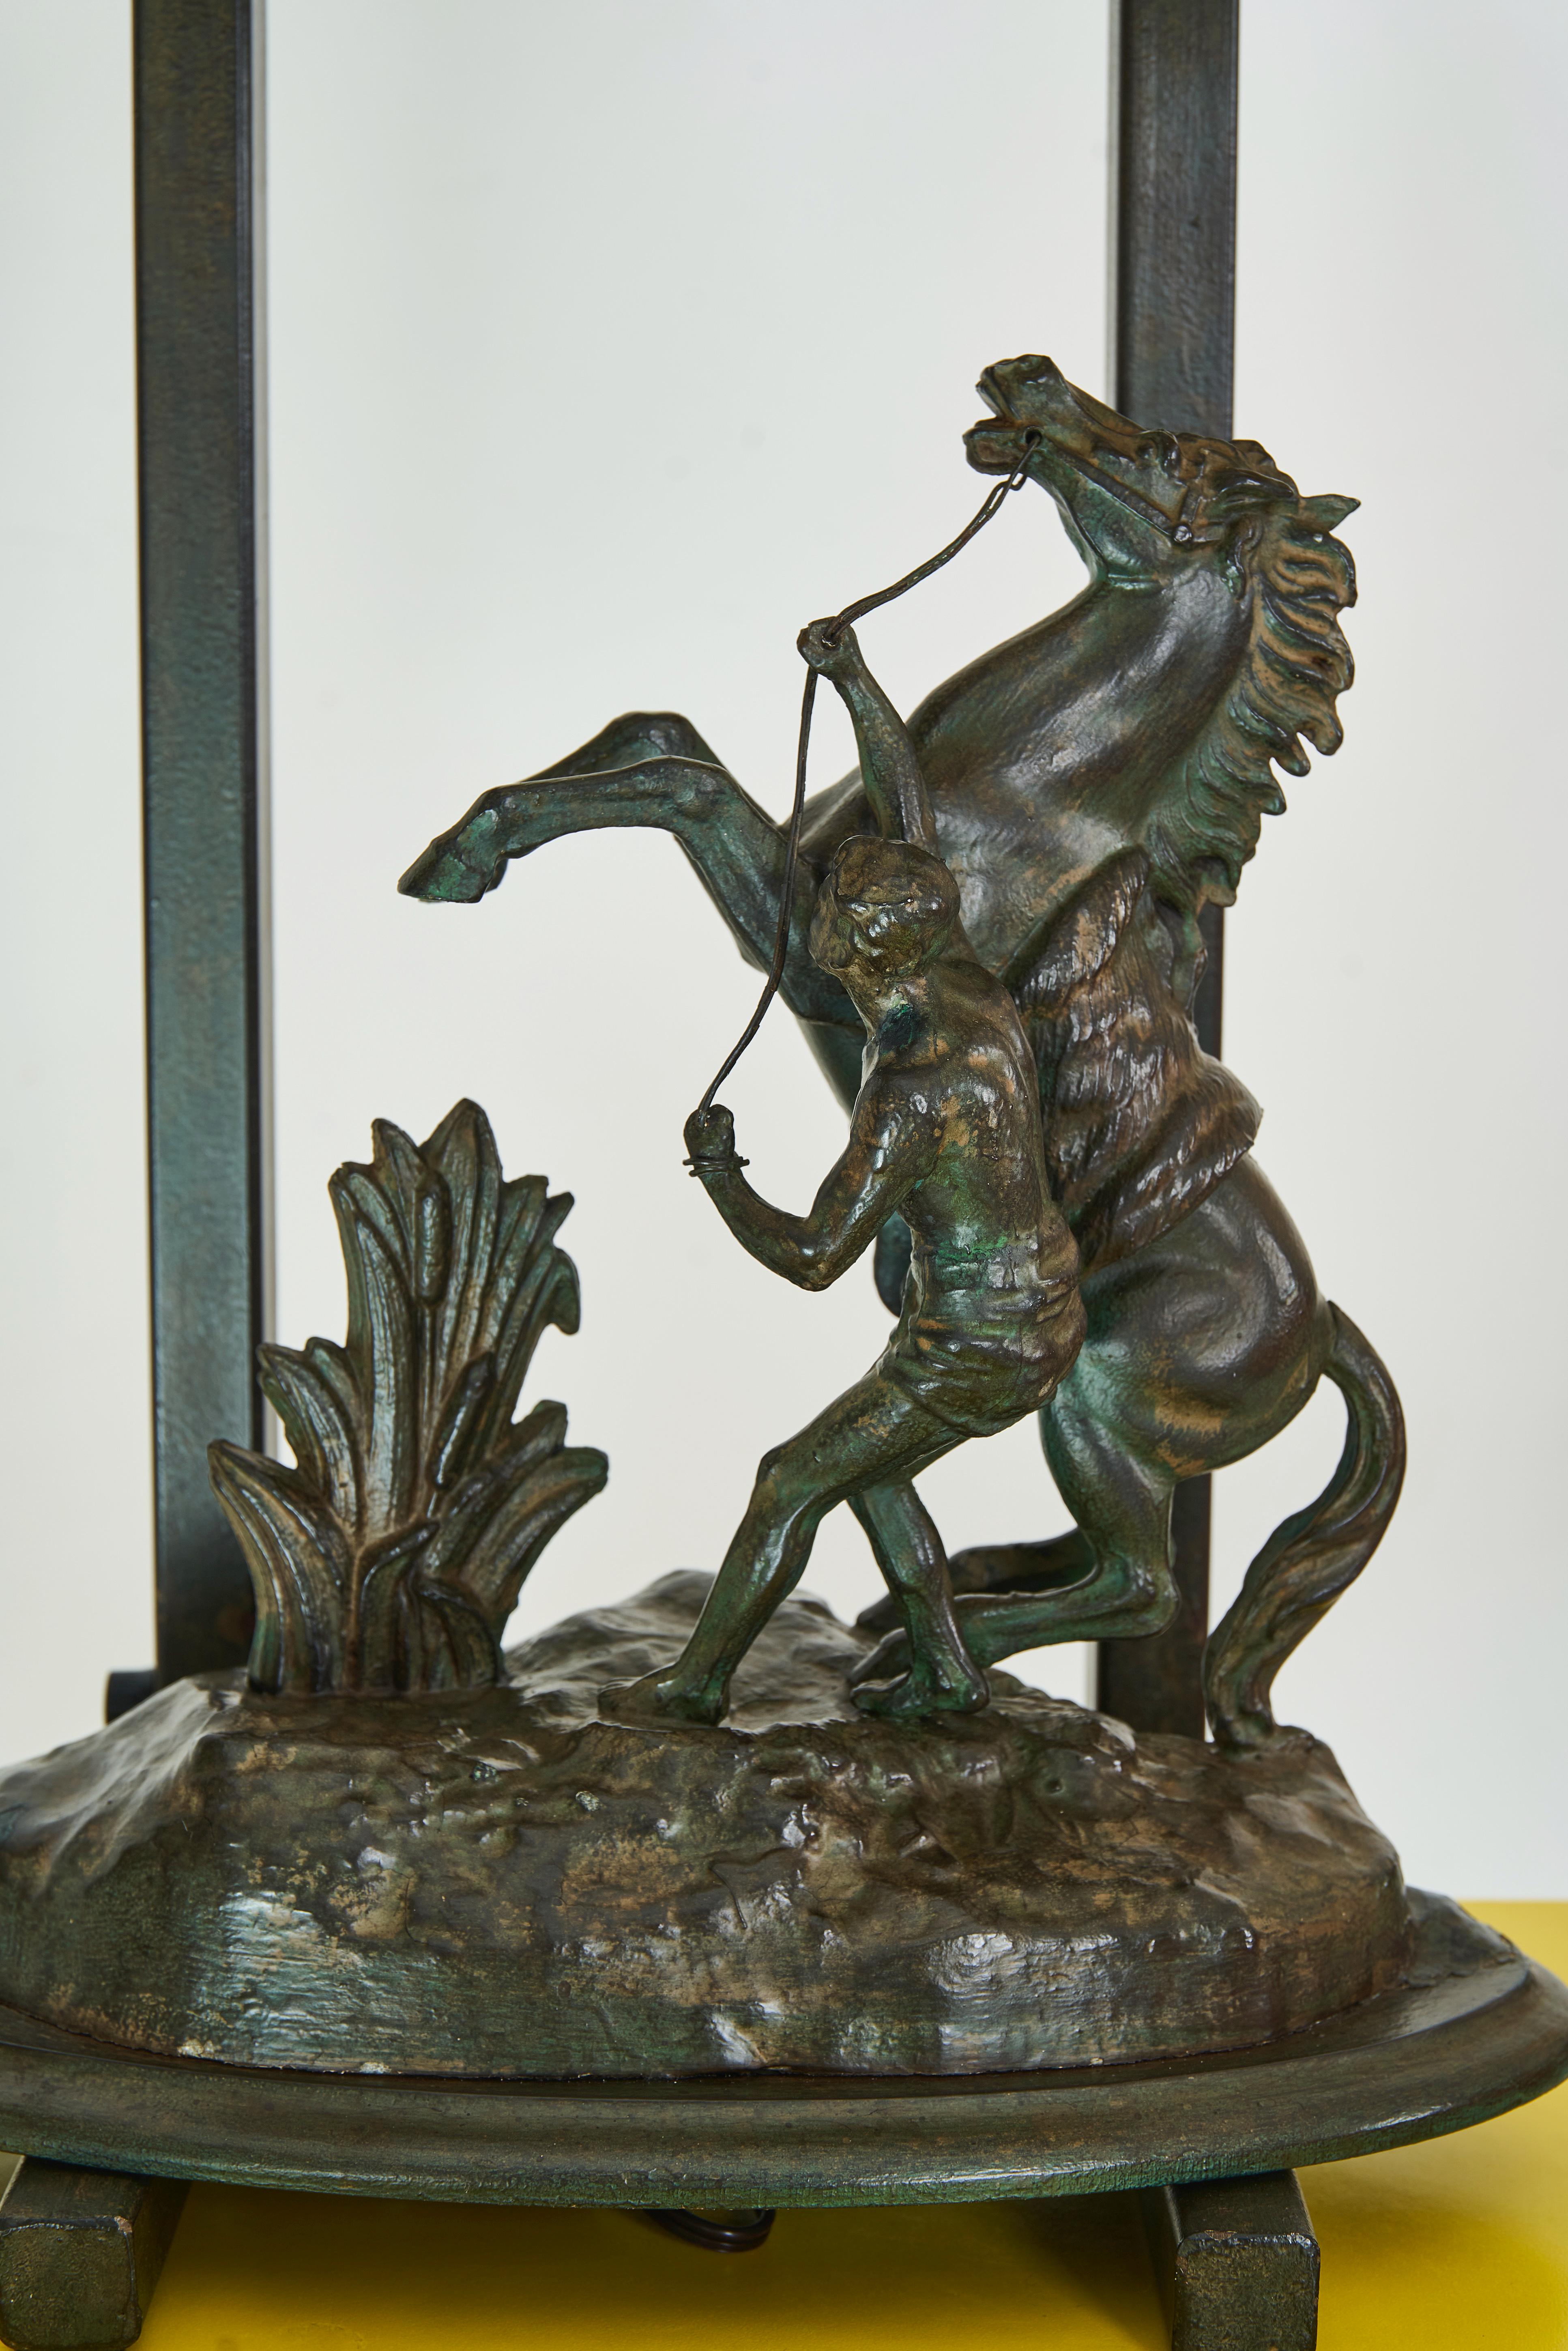 American An Armature Lamp featuring a Rearing Horse designed by William Haines